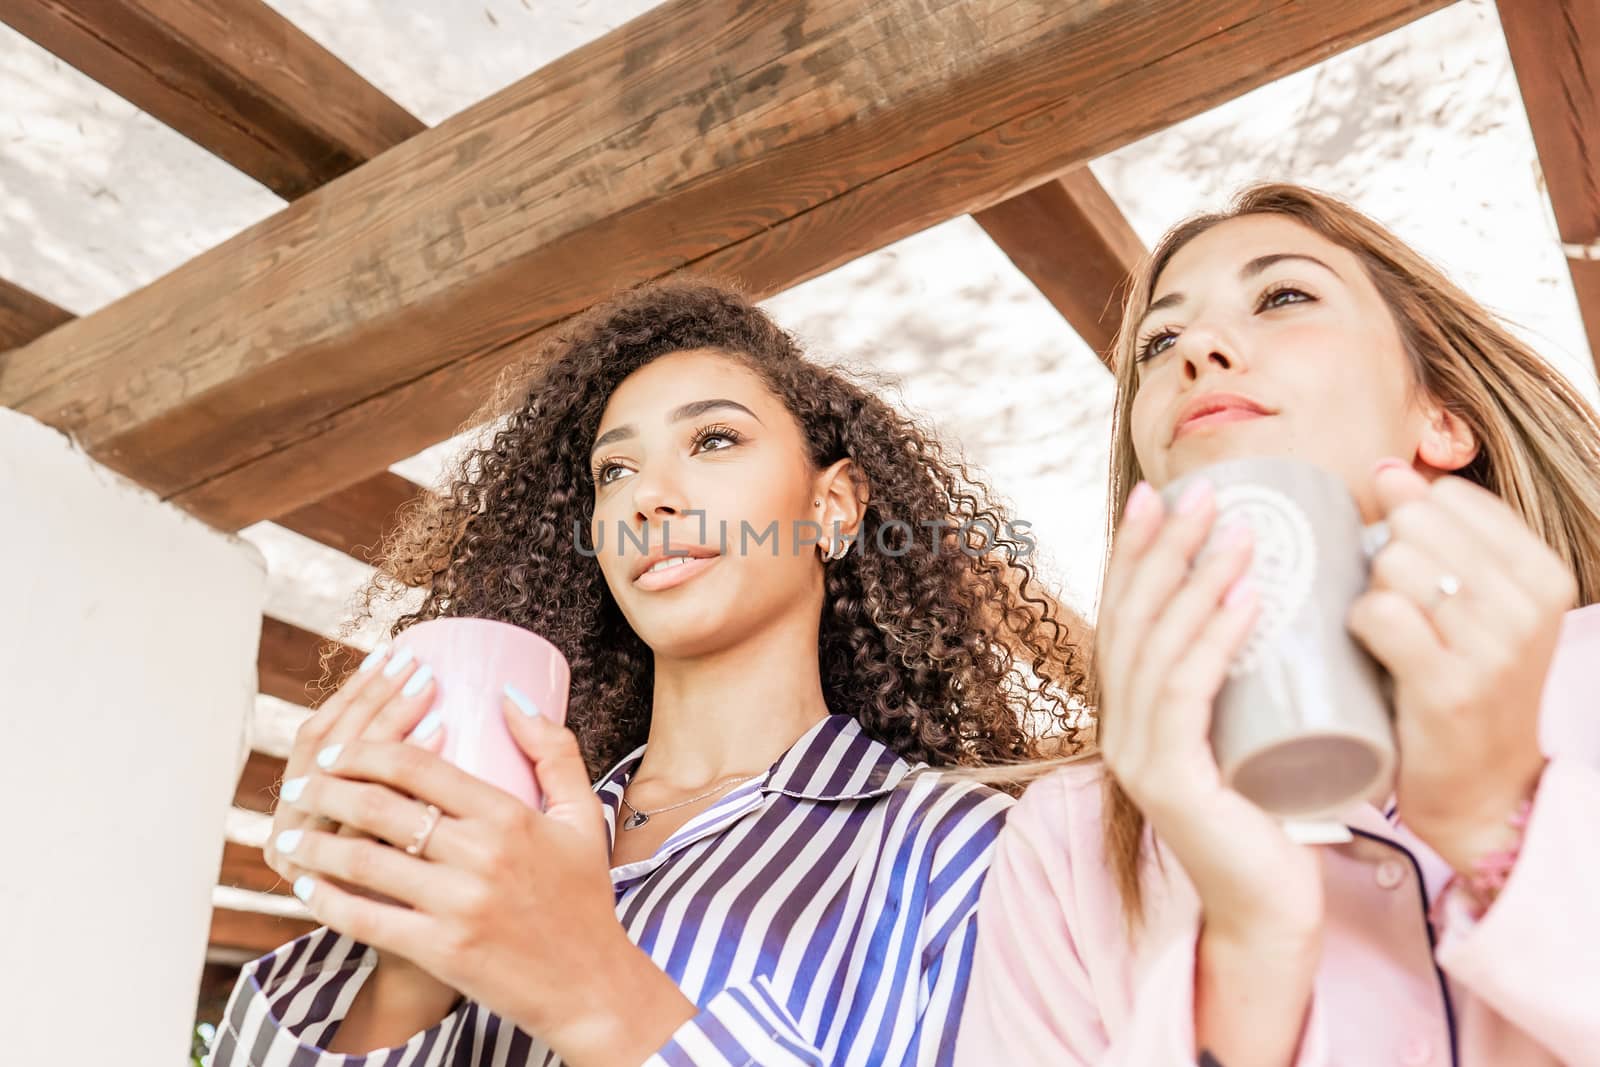 Beauty and diversity: mixed race couple in pajama view from bottom holding tea mug in hand - Caucasian woman and her Hispanic girlfriend just woke up looking toward horizon - Focus on brunette on left